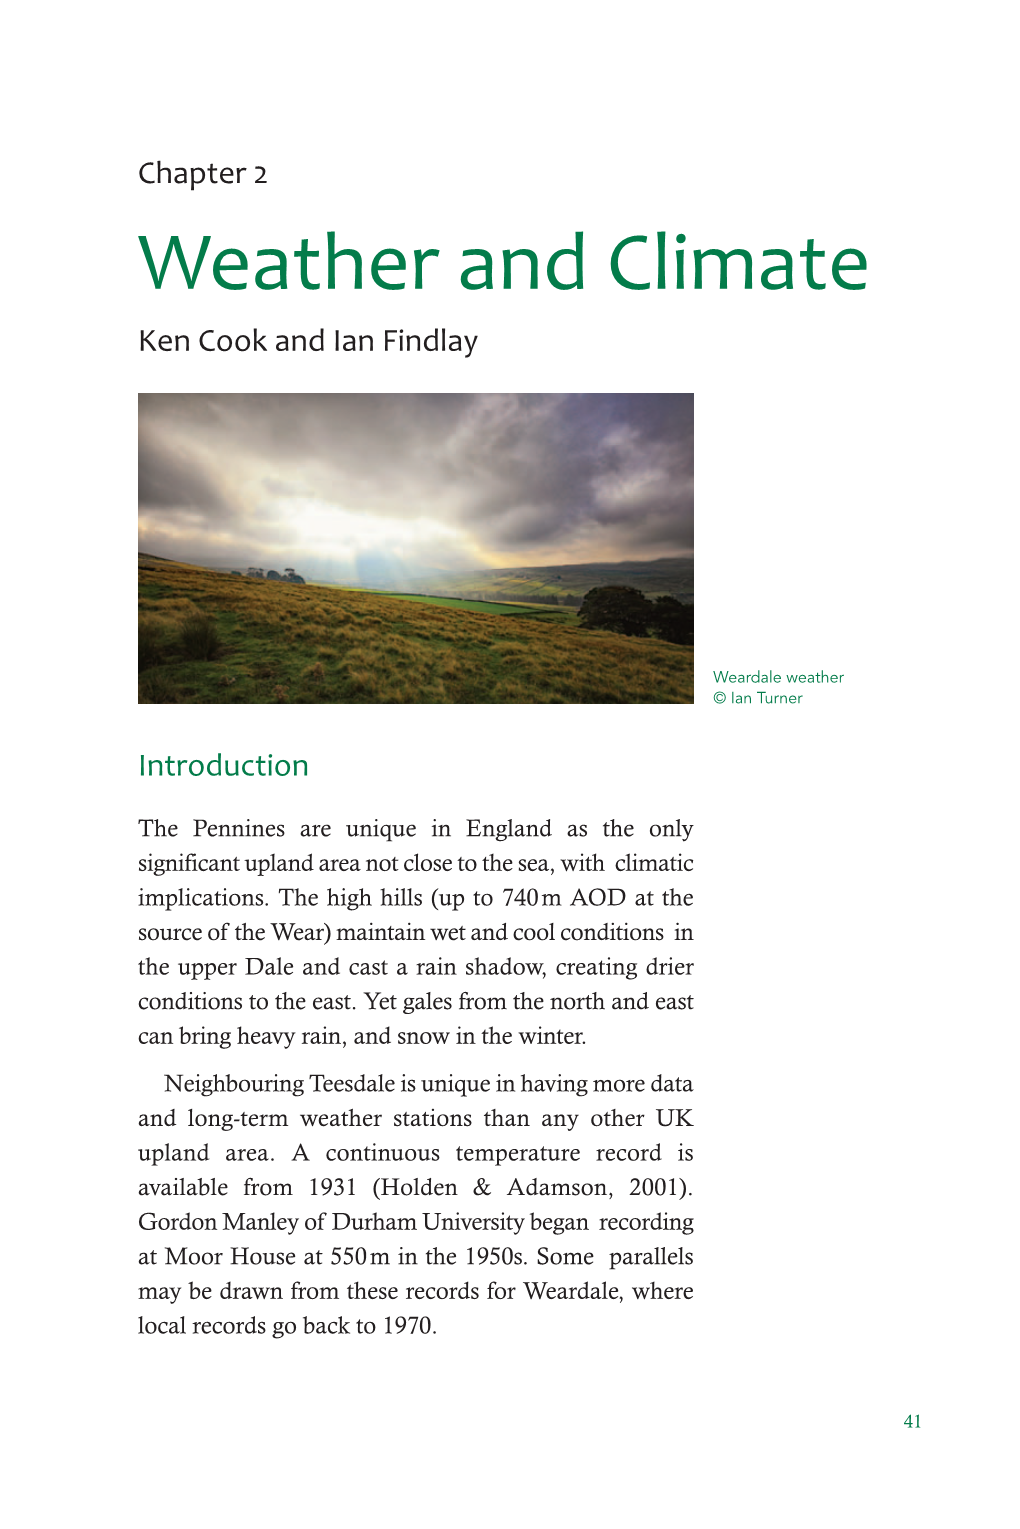 Weather and Climate Is Available As a Download